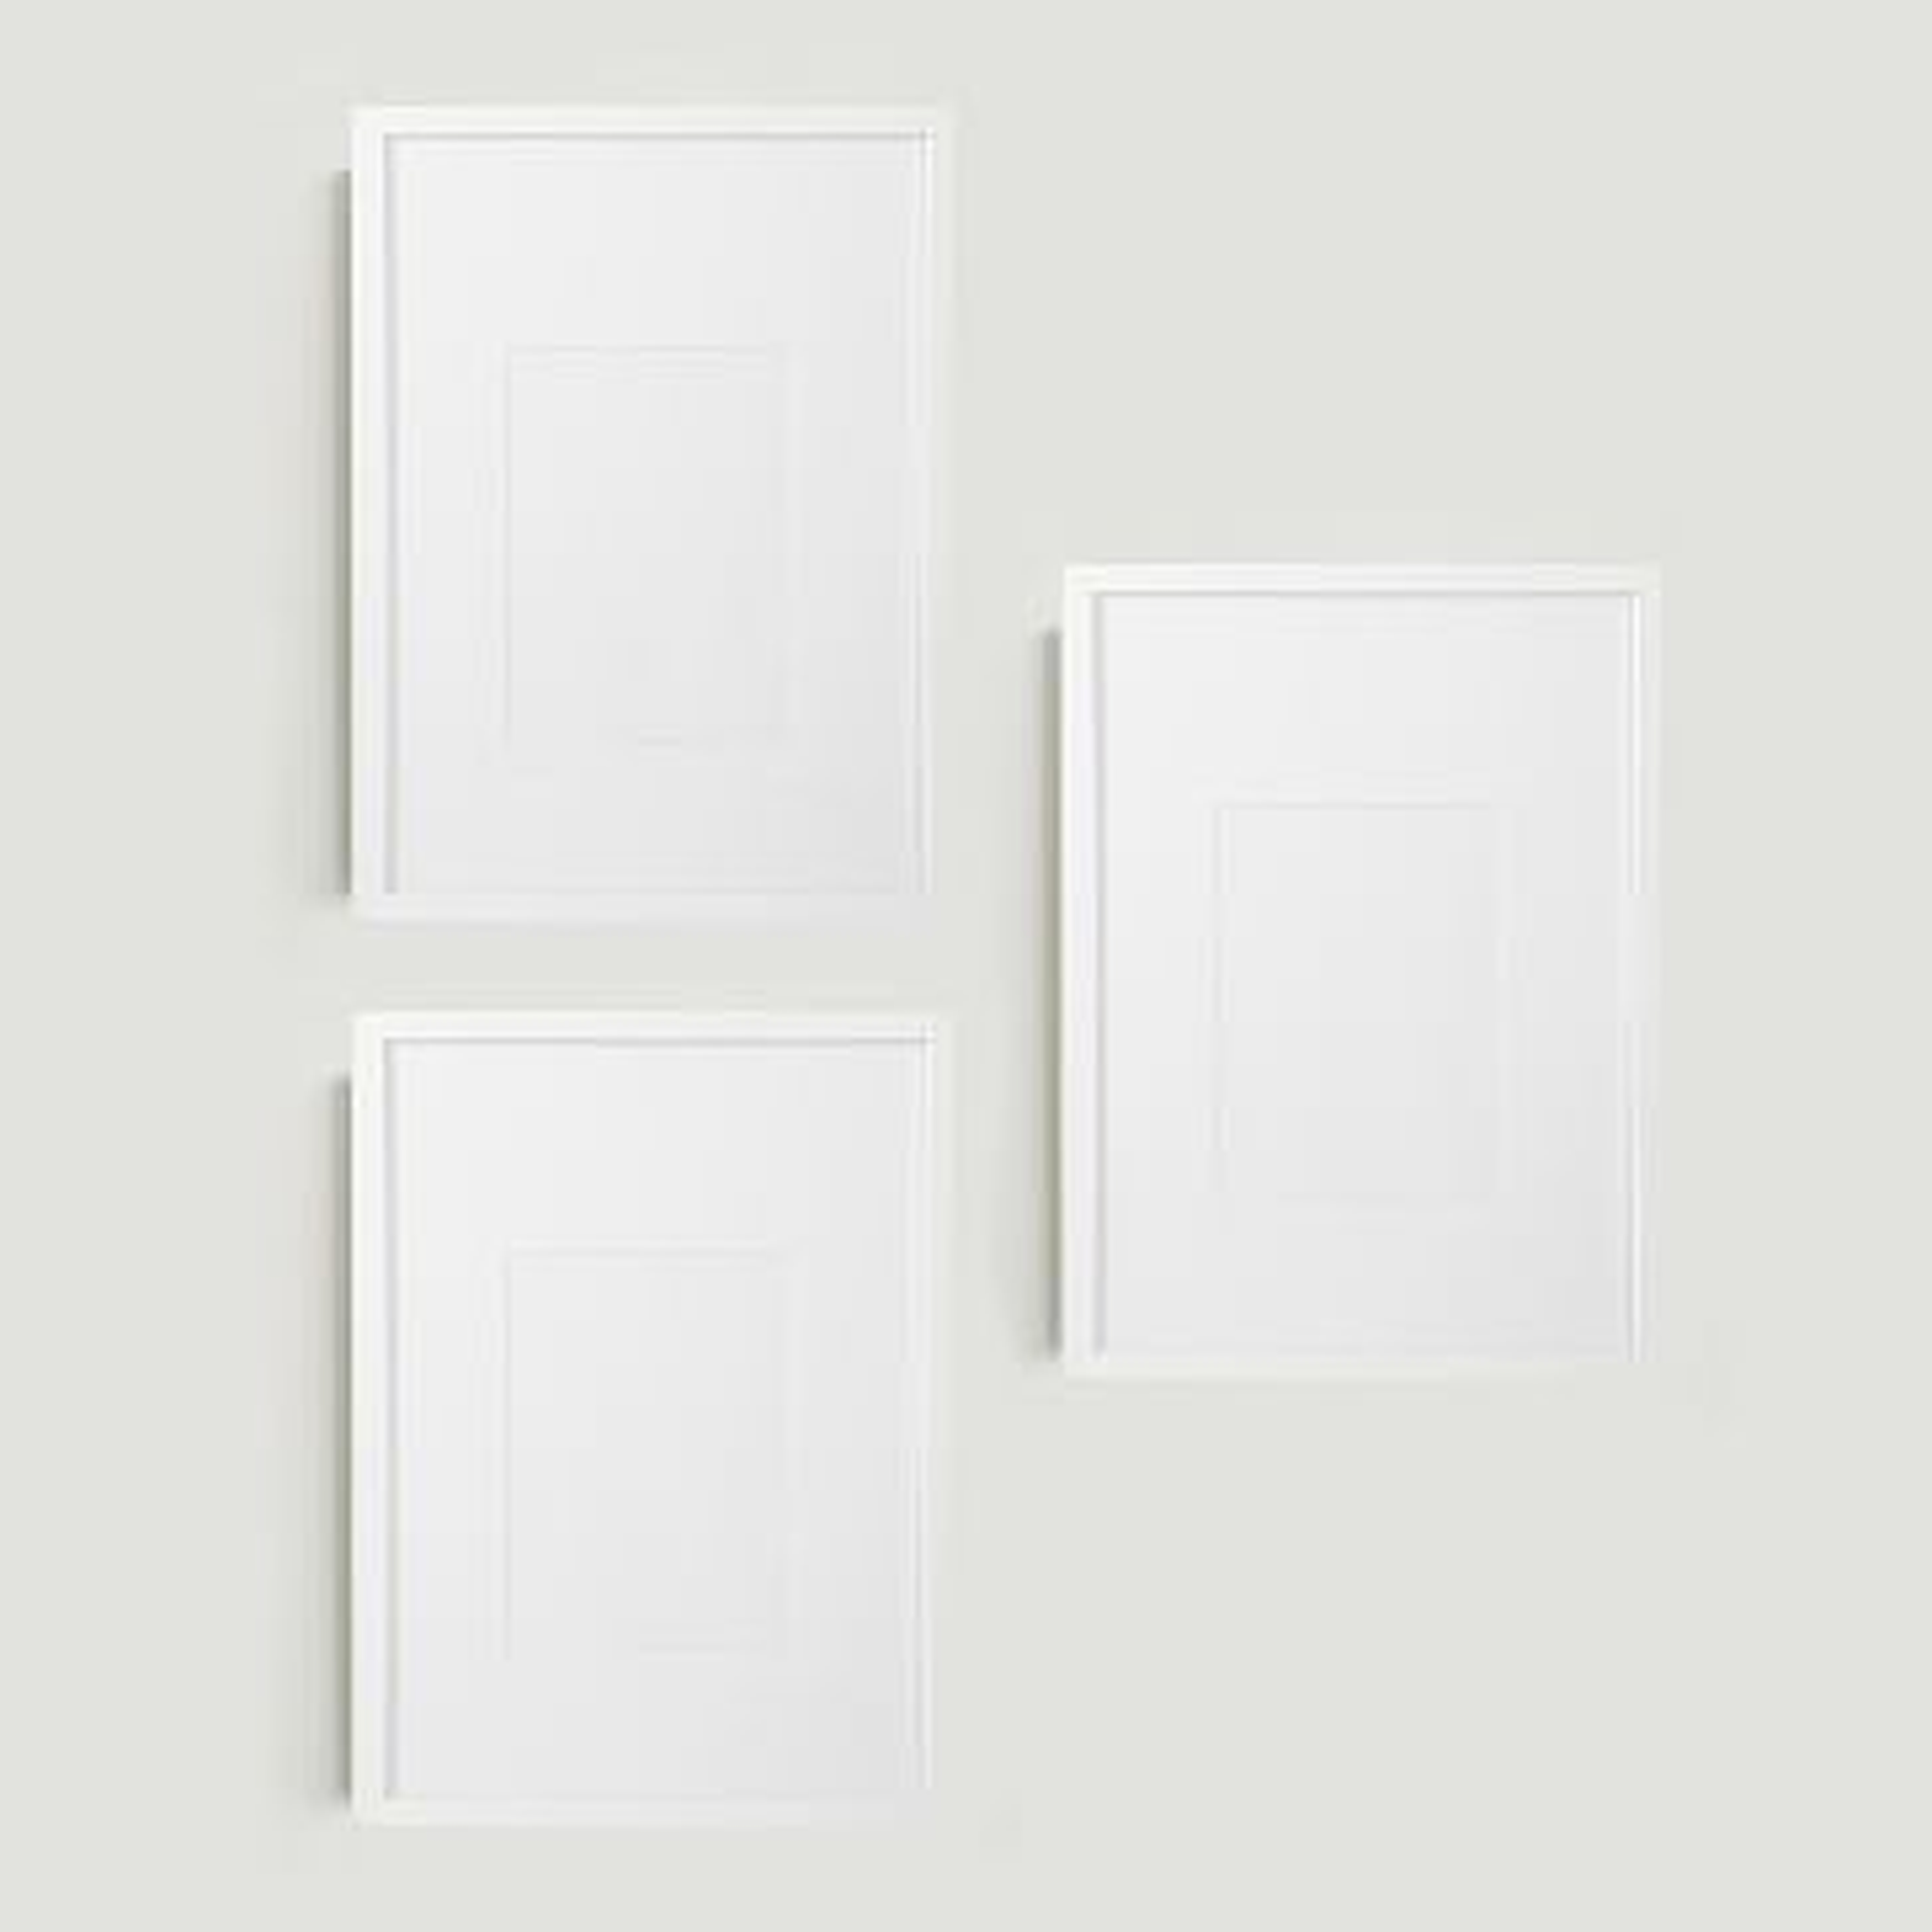 Gallery Frames, Set of 3, 16"x20", White Lacquer - West Elm